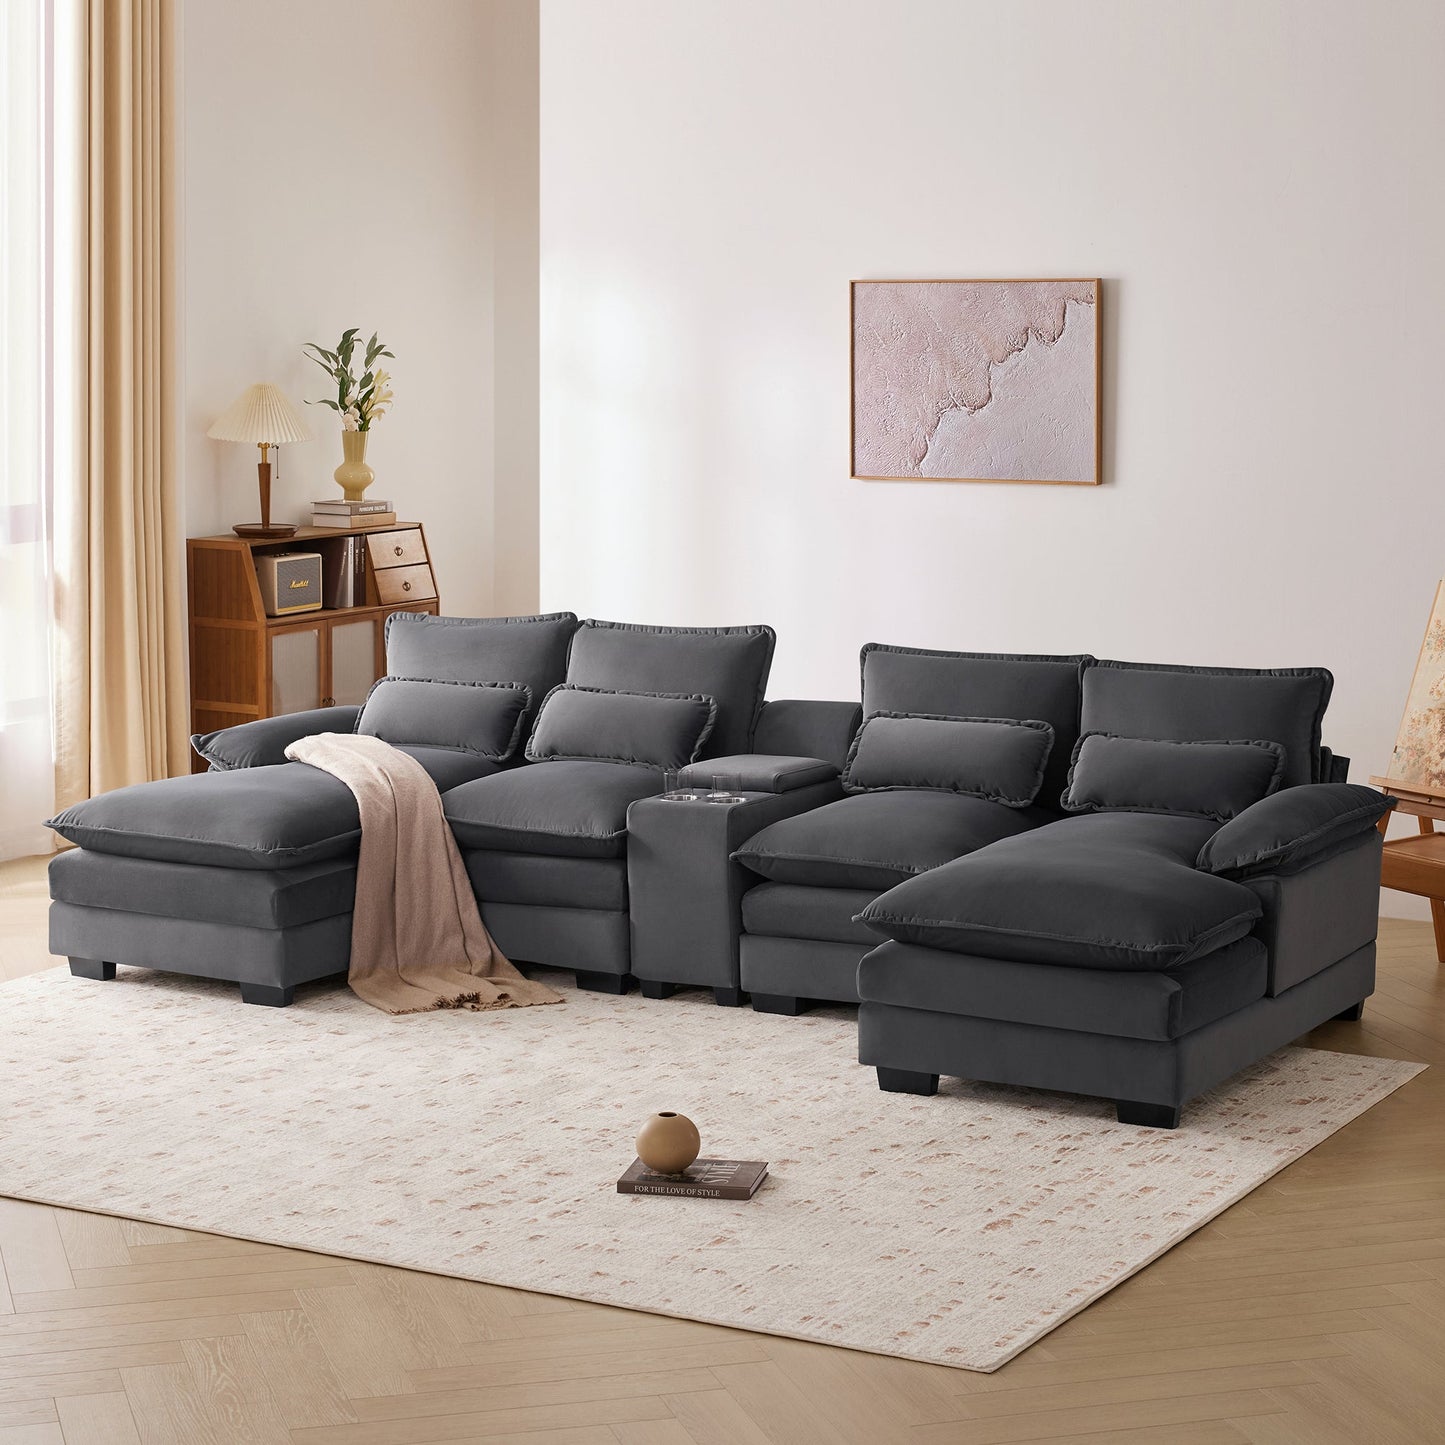 123*55" Modern U-shaped Sofa with Console,Cupholders and USB